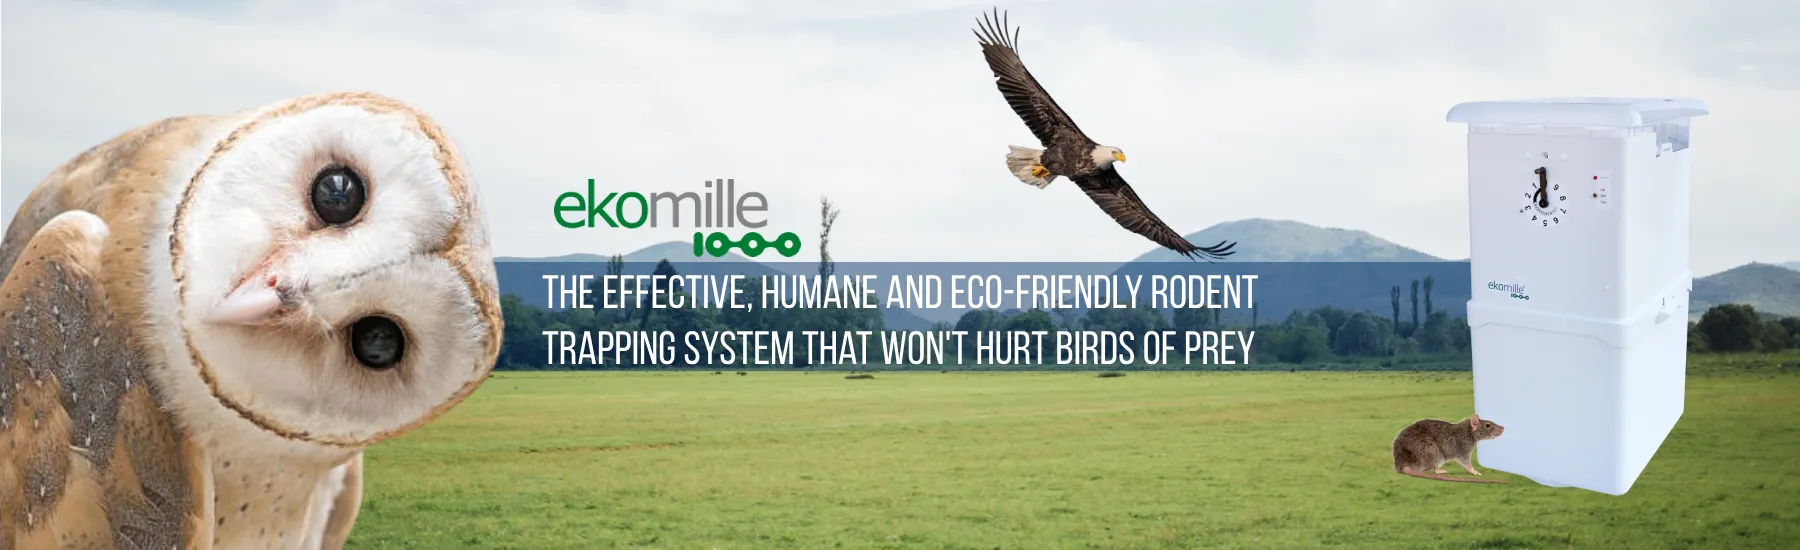 Ekomille is a humane and eco-friendly way of trapping rats without hurting birds pf prey